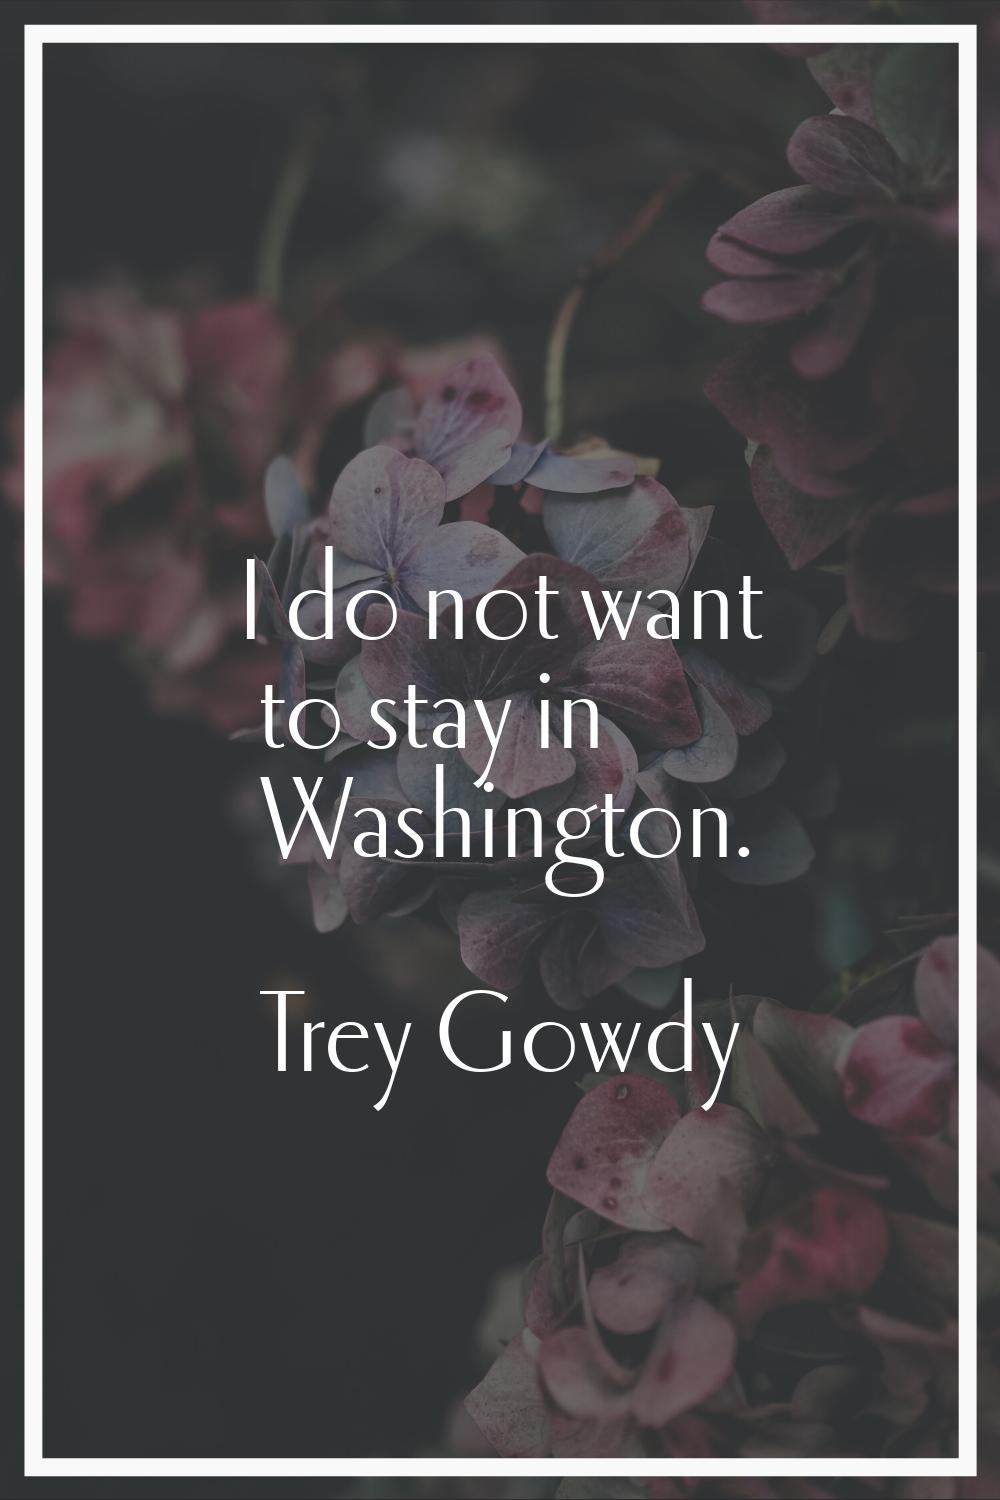 I do not want to stay in Washington.